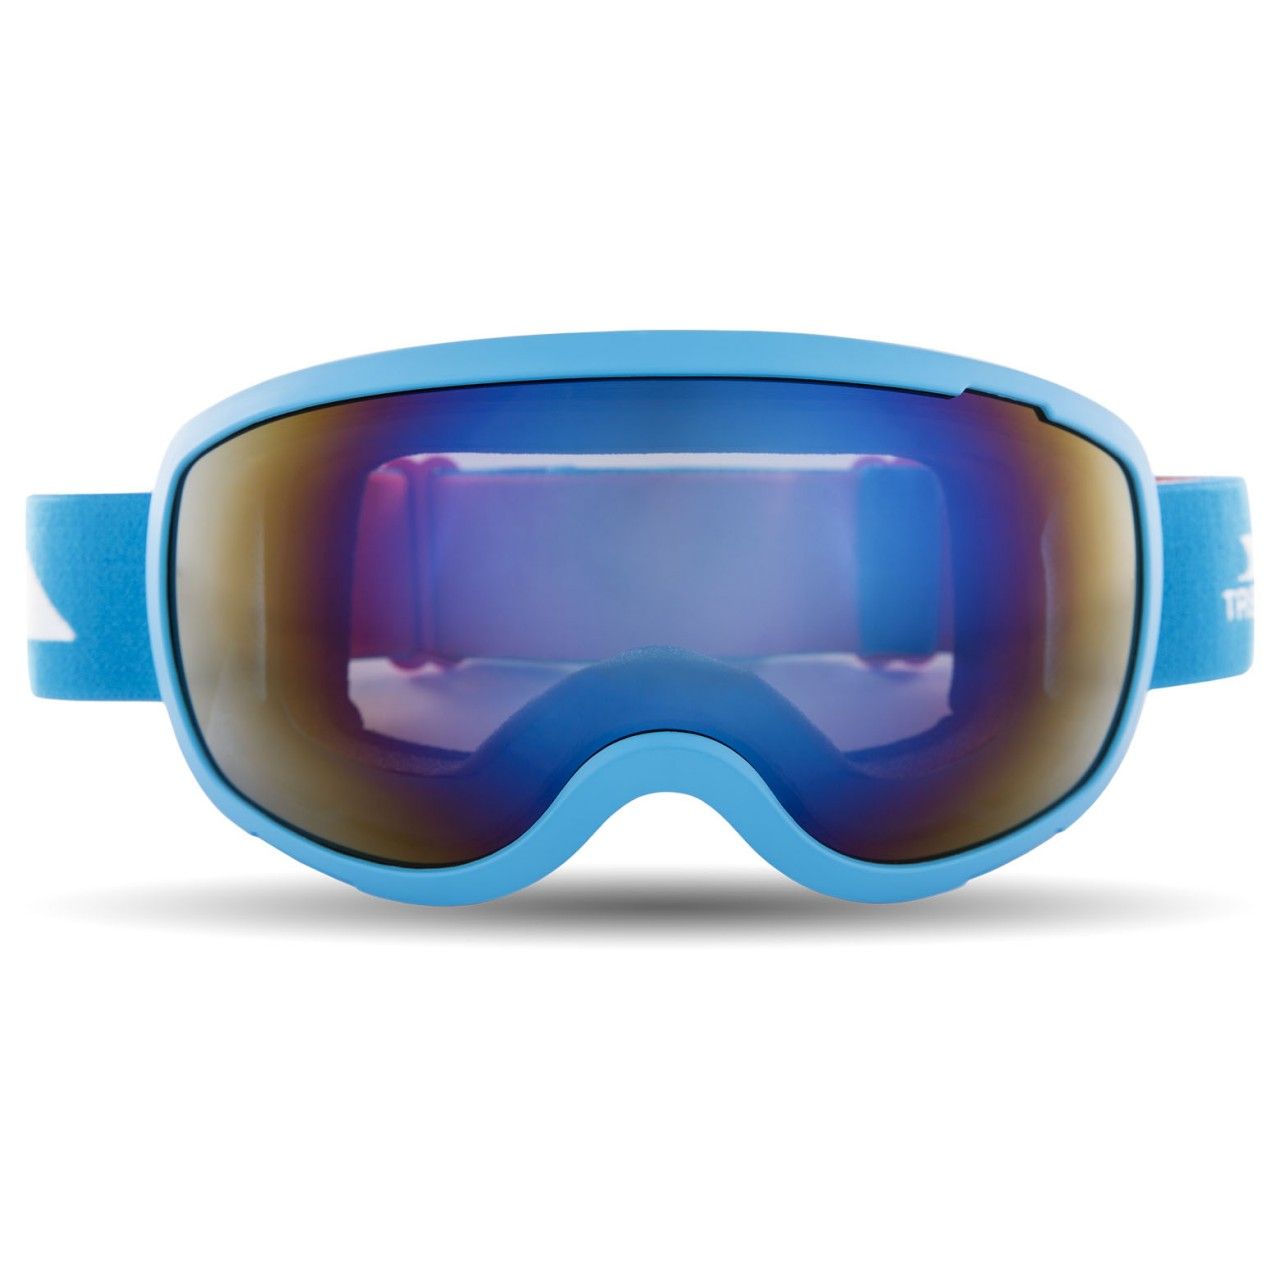 Mirrored dual spherical lens. UV 4000nm protection. Antifog coating and strategic ventilation. 3 layer face fitting foam. Adjustable headband.